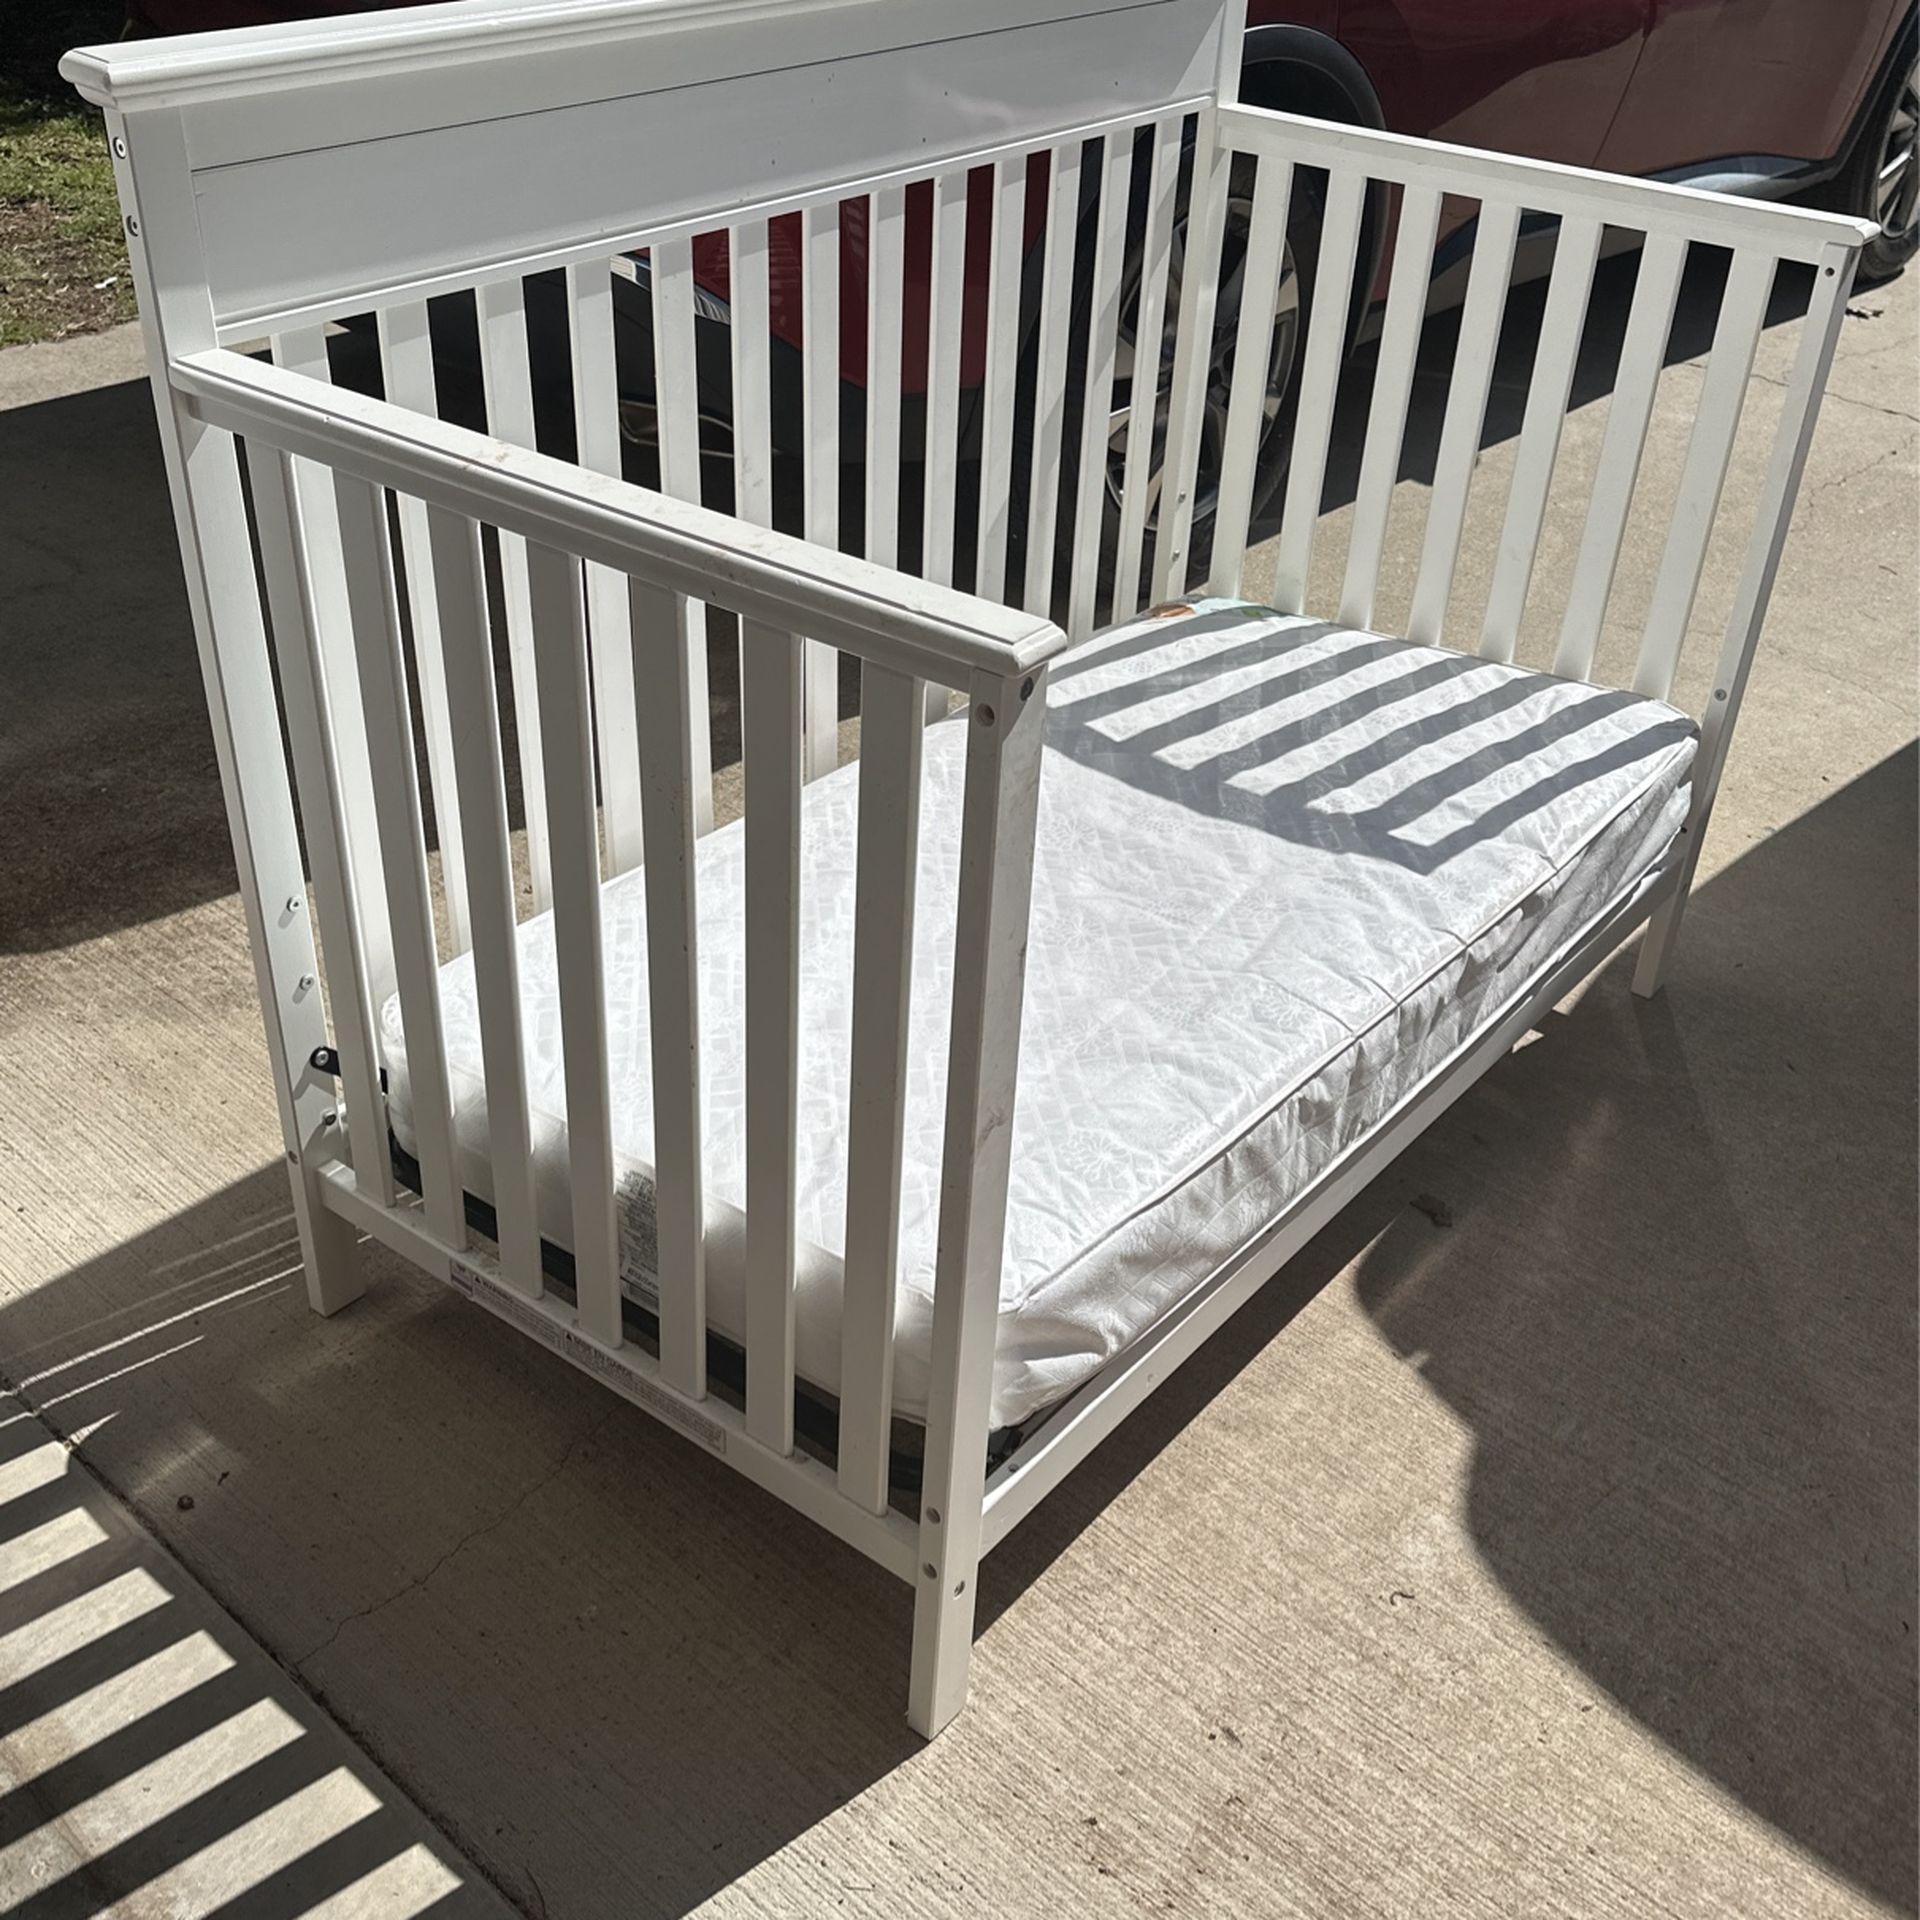 Toddler Bed And Mattress For Sale